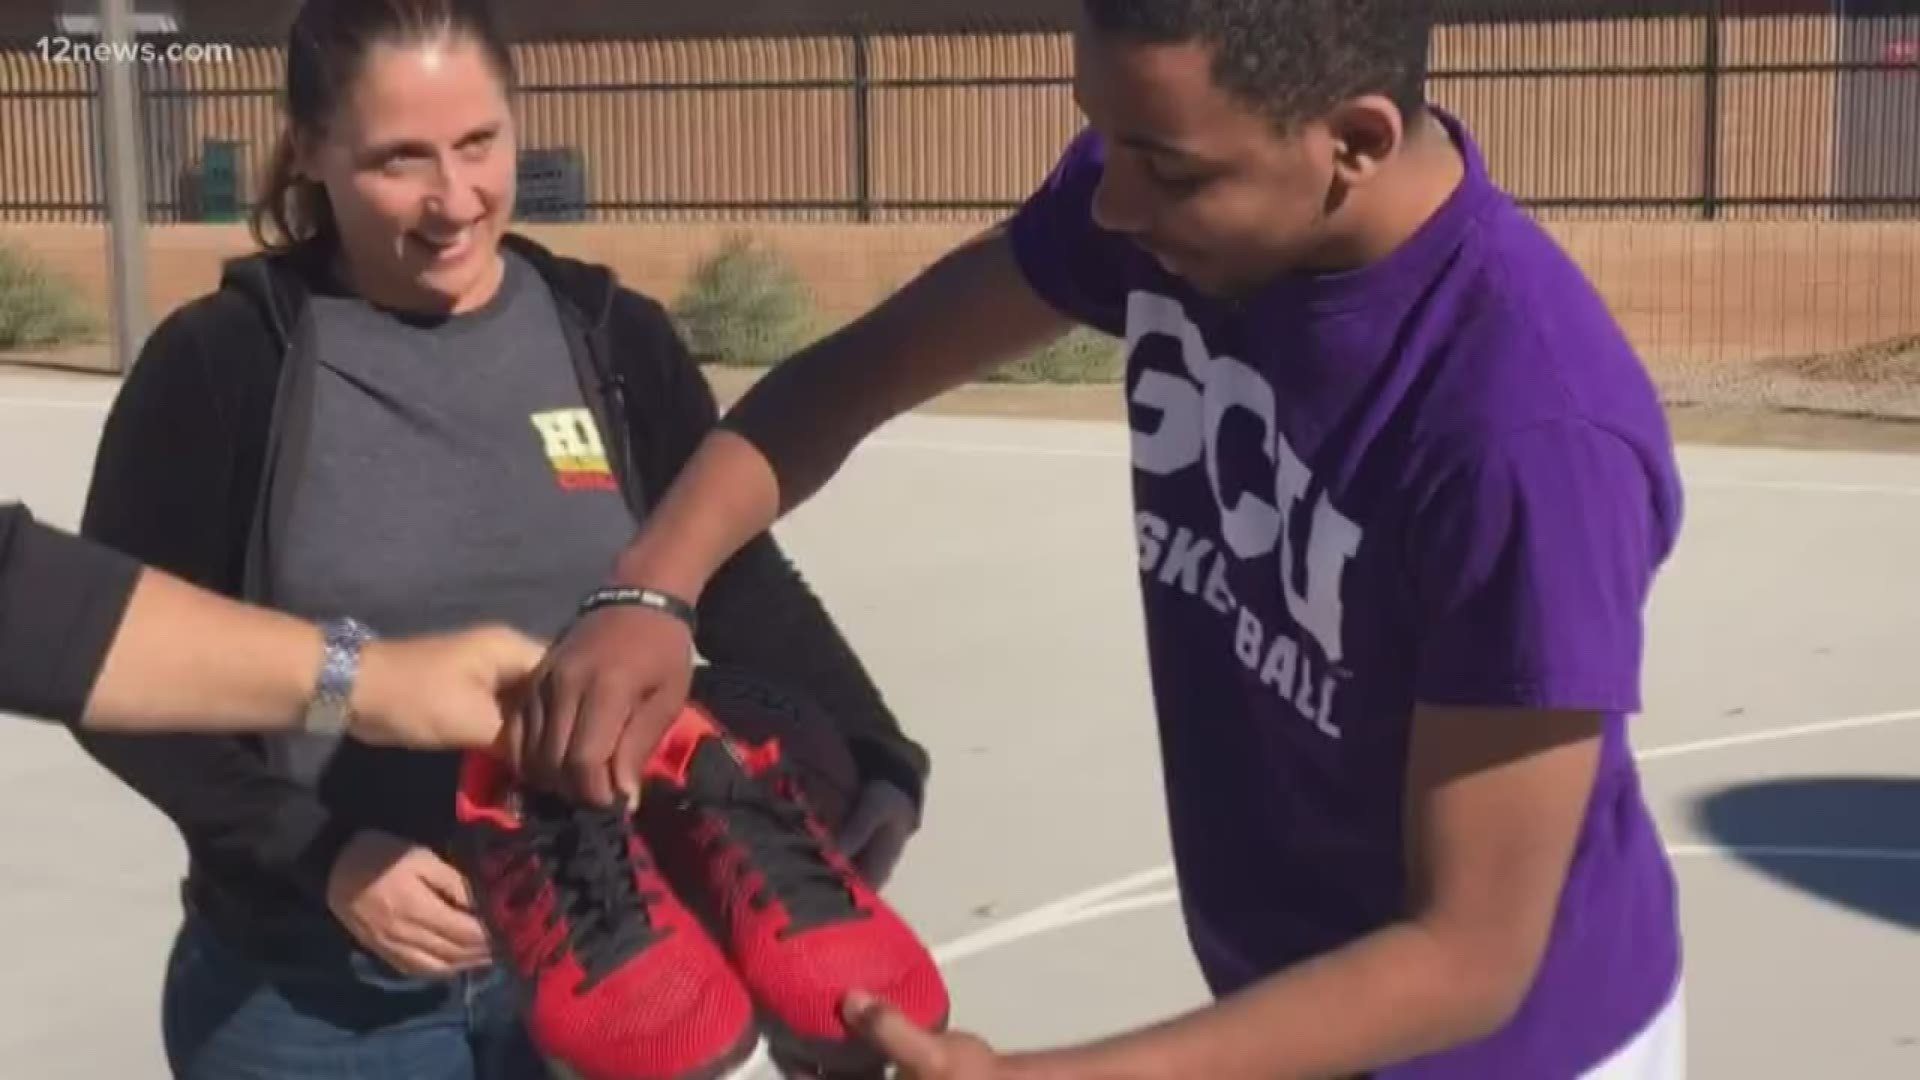 Kurth Hentges didn't want to sell his Kobe Bryant shoes, so he decided to give them away on Facebook -- but only to a true fan.